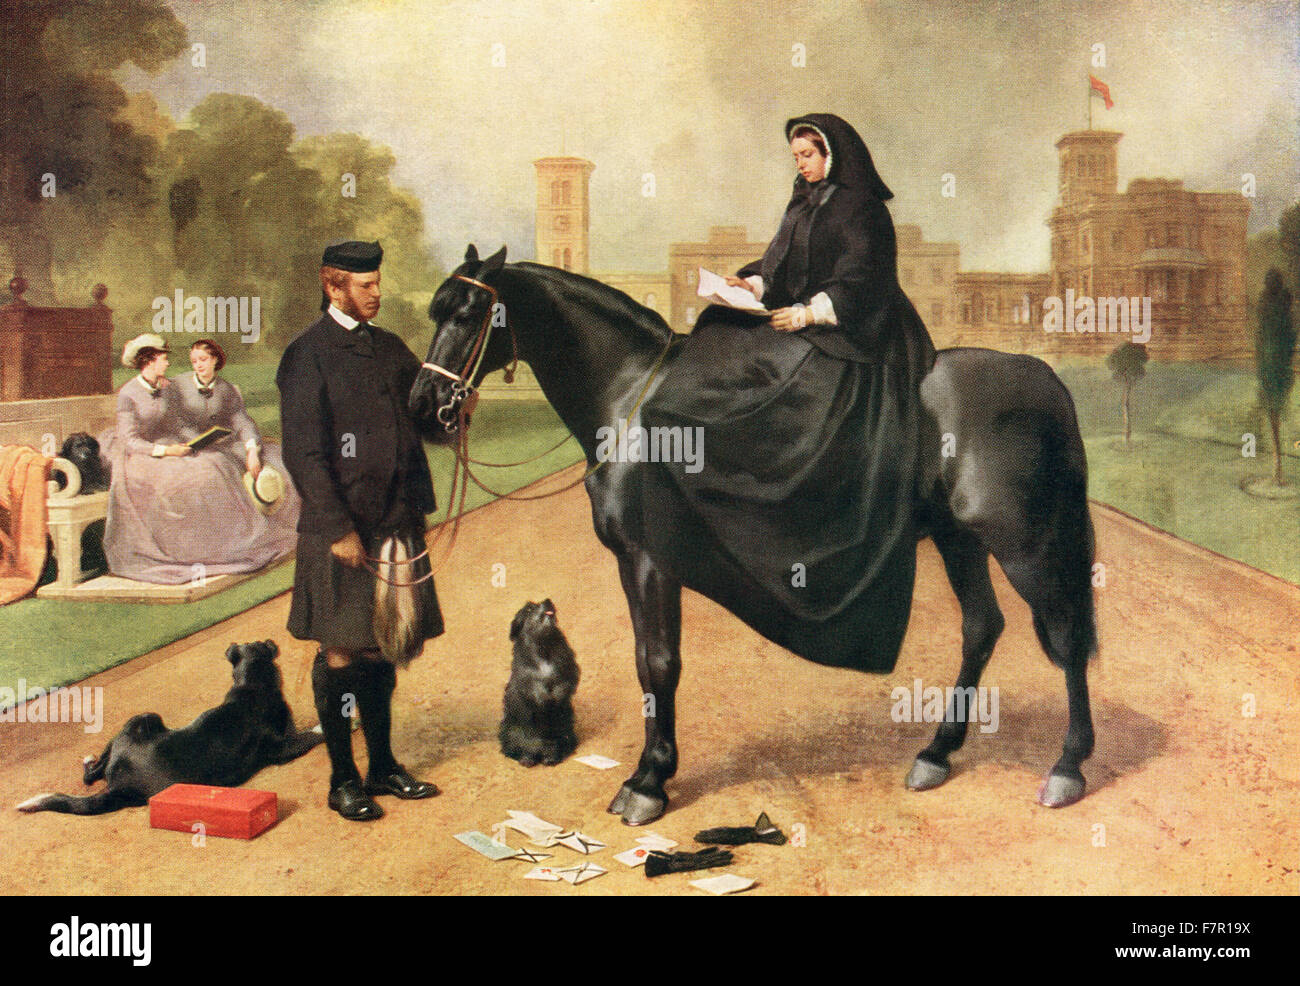 Queen Victoria at Osborne House, Isle of Wight, England, 1865. Victoria, 1819 – 1901, Queen of the United Kingdom of Great Britain and Ireland.  She is seated on her pony Flora which is held by her ghillie John Brown.  After the painting by Sir Edwin Landseer. Stock Photo